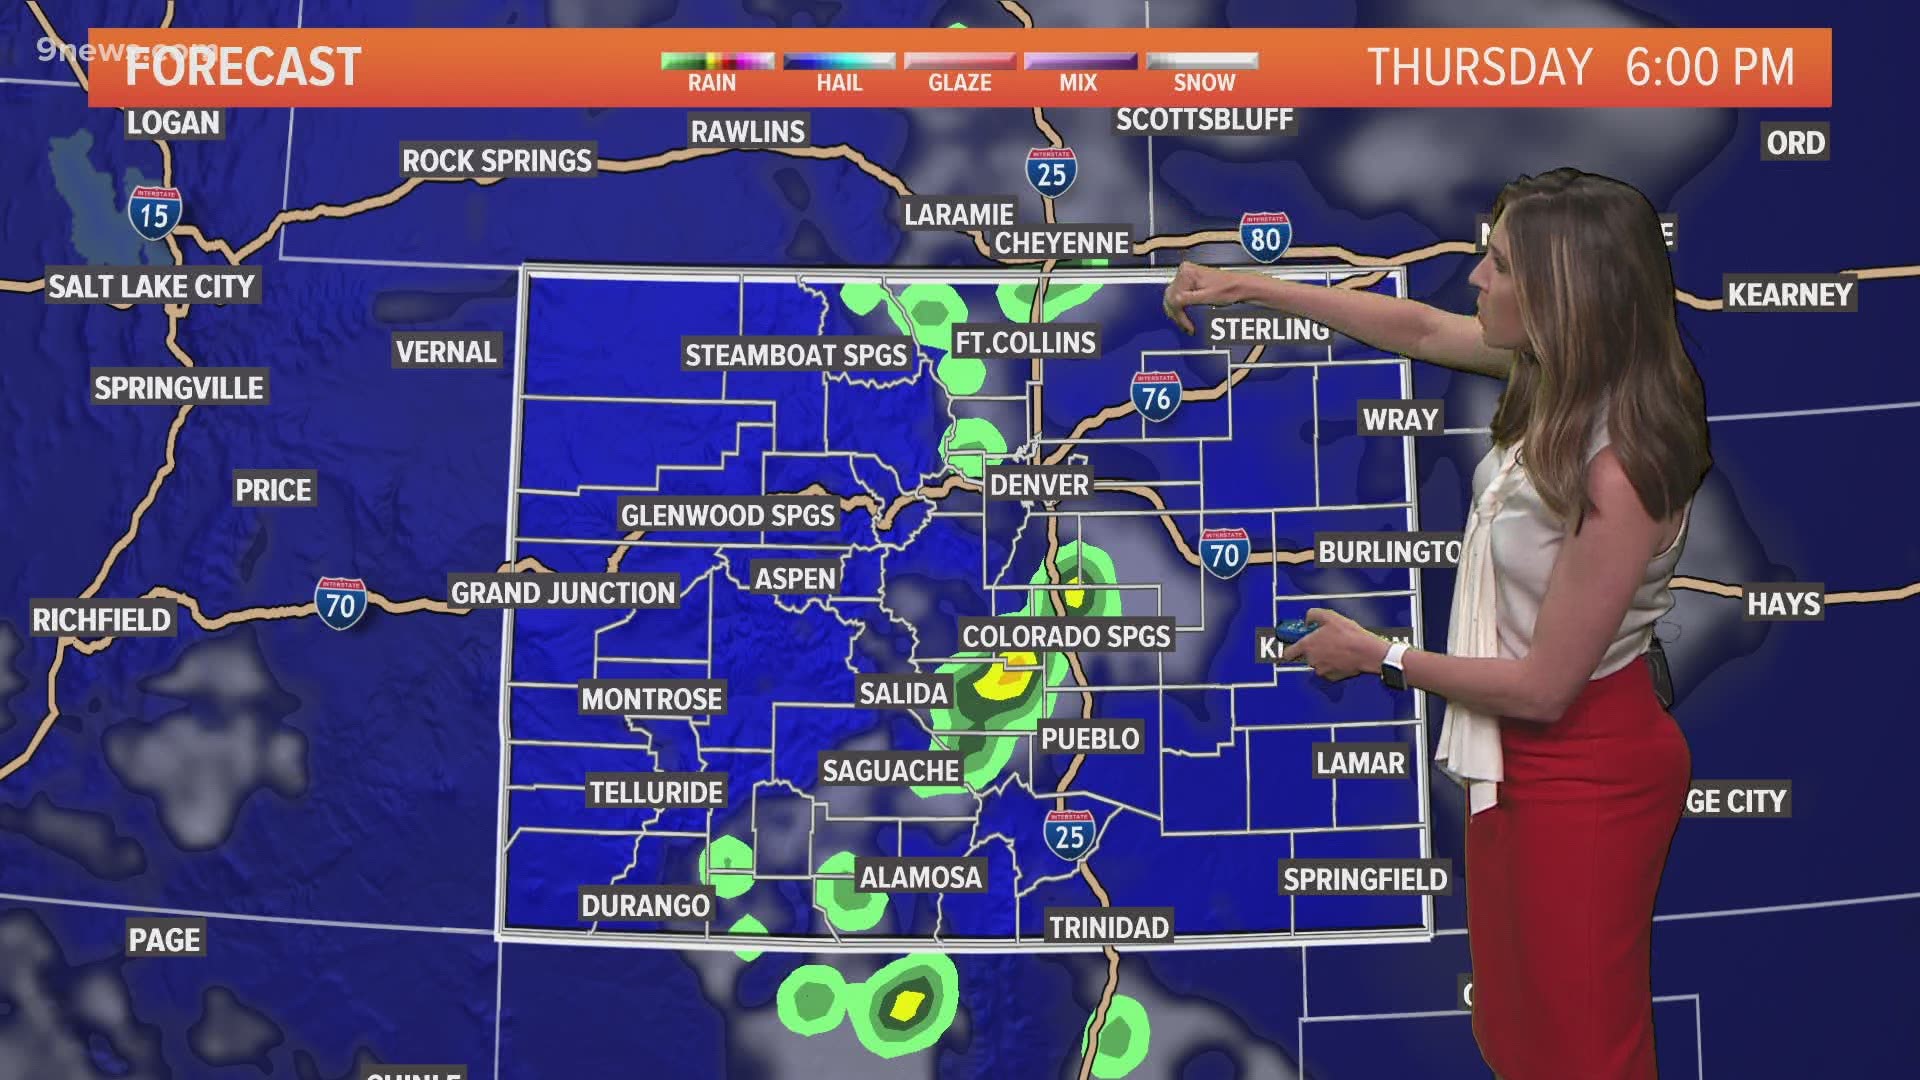 Another chance for afternoon thunderstorms Thursday. Becky Ditchfield has your afternoon forecast.